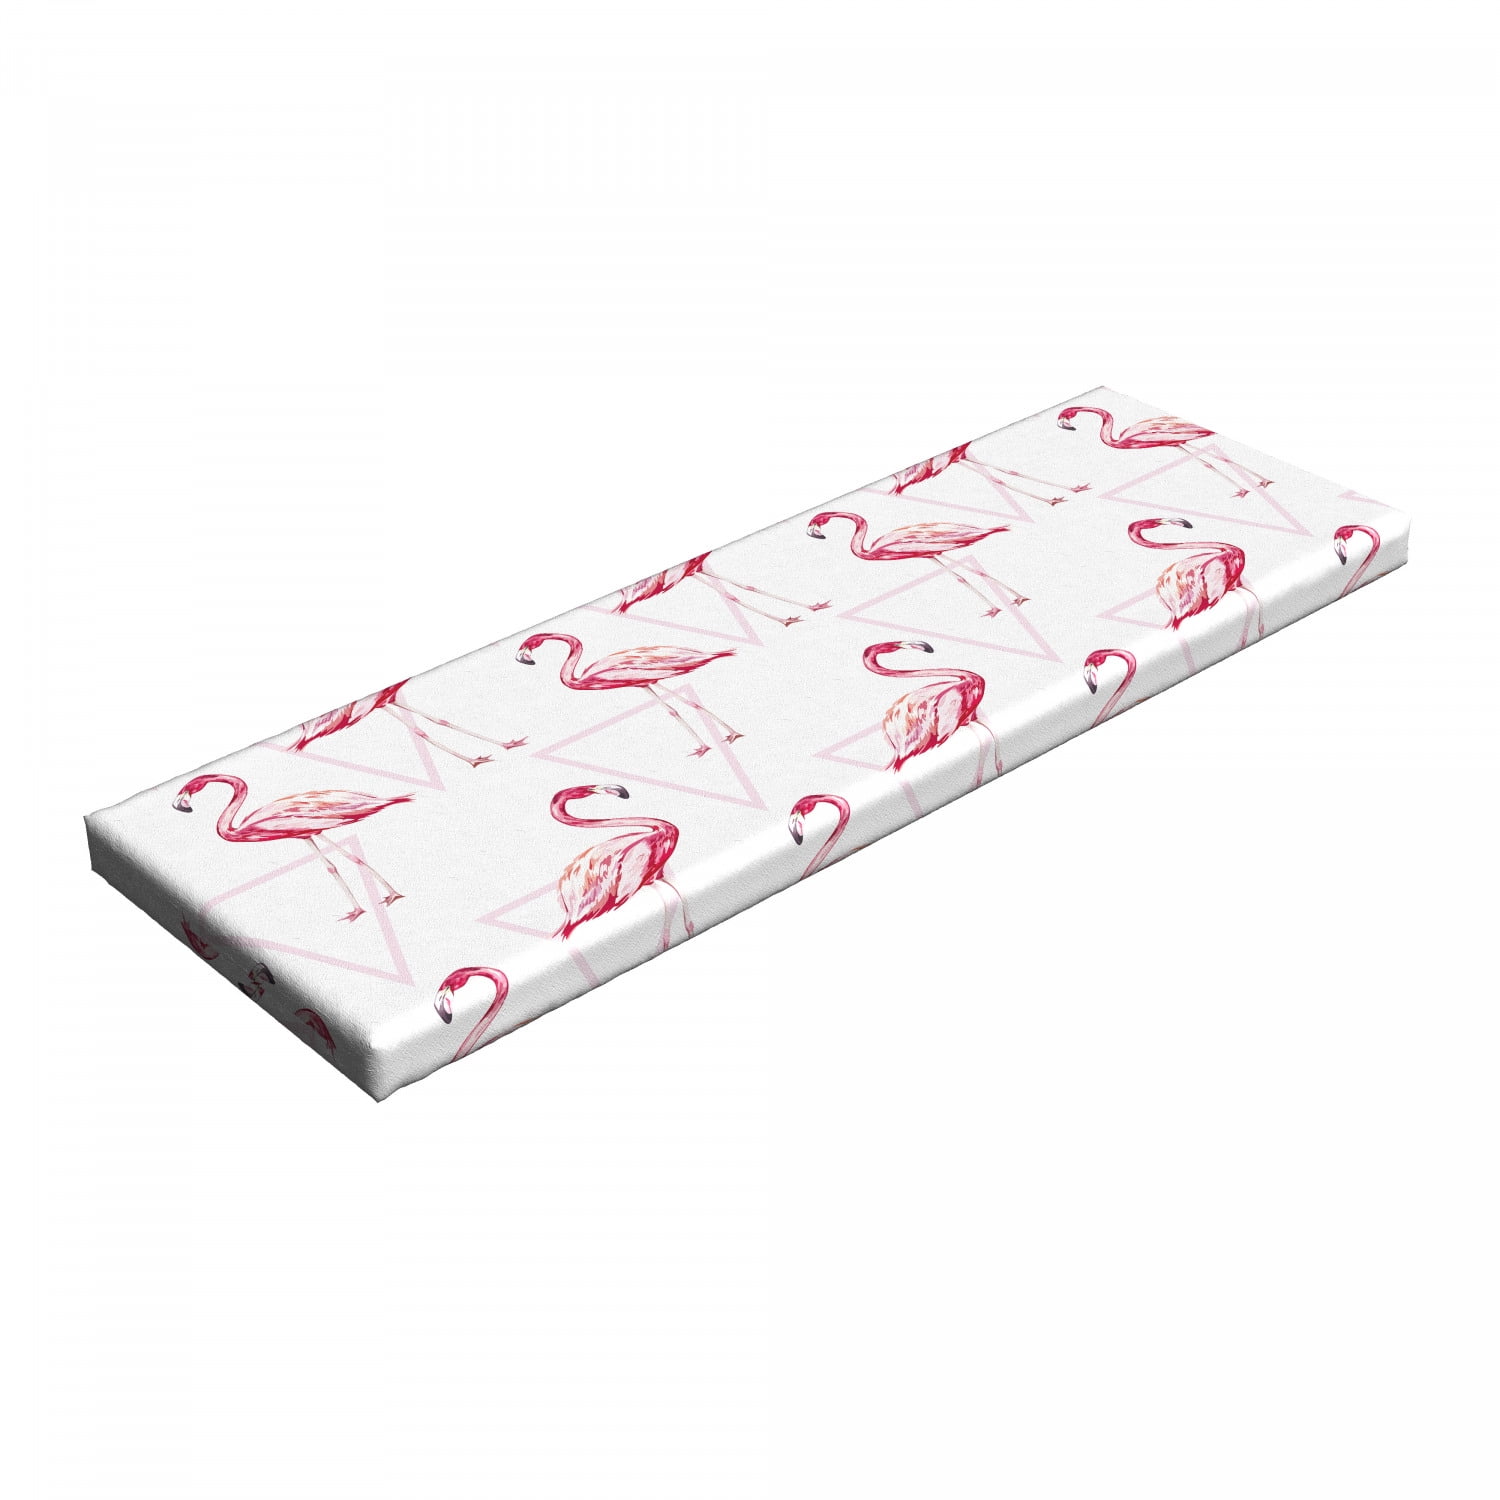 Senaat Auroch Klacht Flamingo Bench Pad, Realistic Drawing Style Animals on Geometrical Backdrop  with Pink Triangles, HR Foam Cushion with Decorative Fabric Cover, 45" x  15" x 2", Pink Peach White, by Ambesonne - Walmart.com